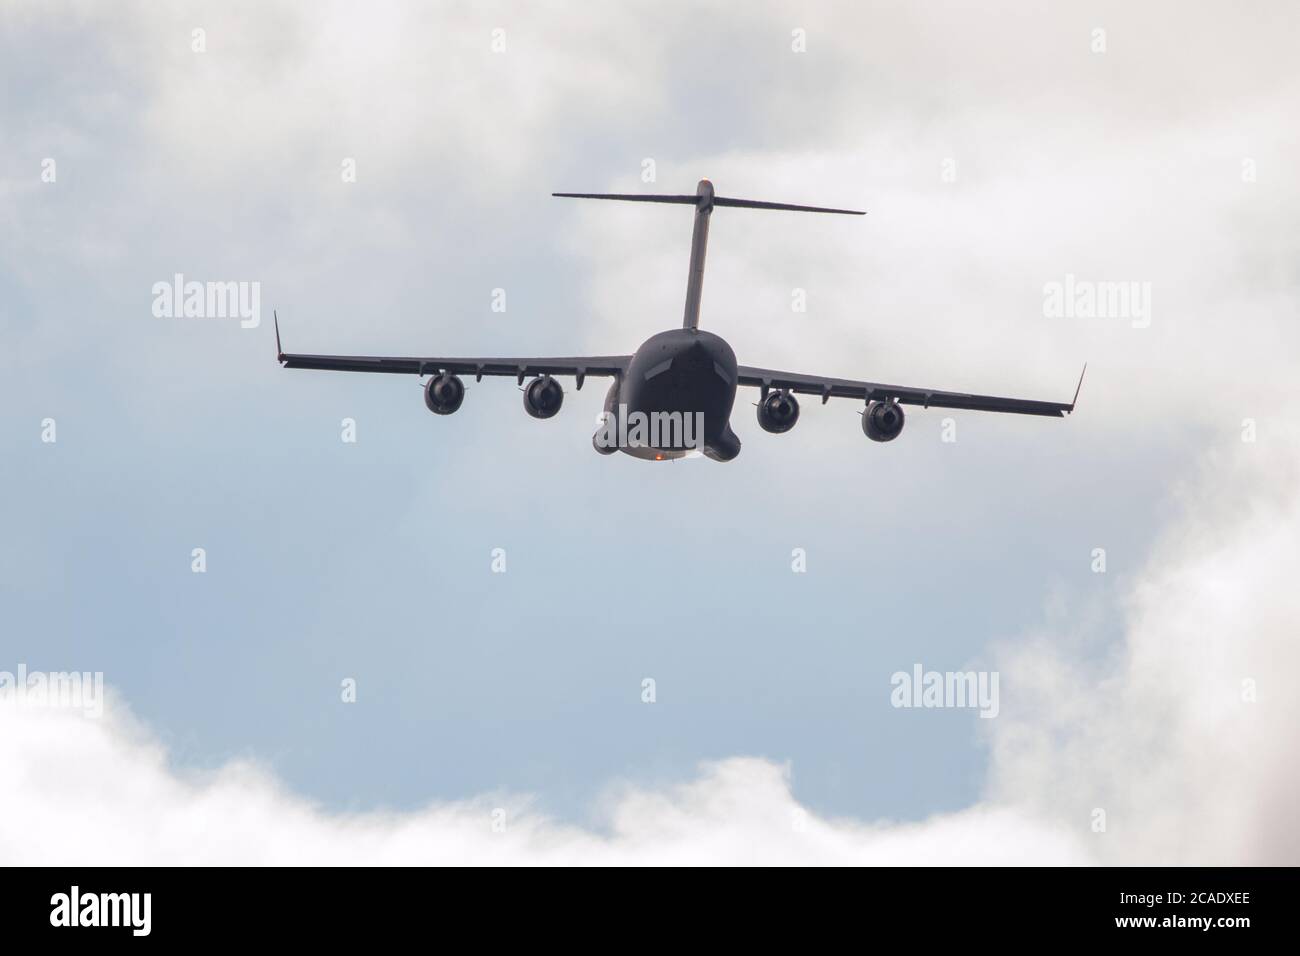 Edinburgh, Scotland, UK. 6th Aug, 2020. Pictured: Royal Air Force (RAF) Boeing C-17A Globemaster III Aircraft (reg ZZ171) seen at Edinburgh Airport doing a circuit on-a-round-the-UK training flight from RAF Brize Norton. Credit: Colin Fisher/Alamy Live News Stock Photo